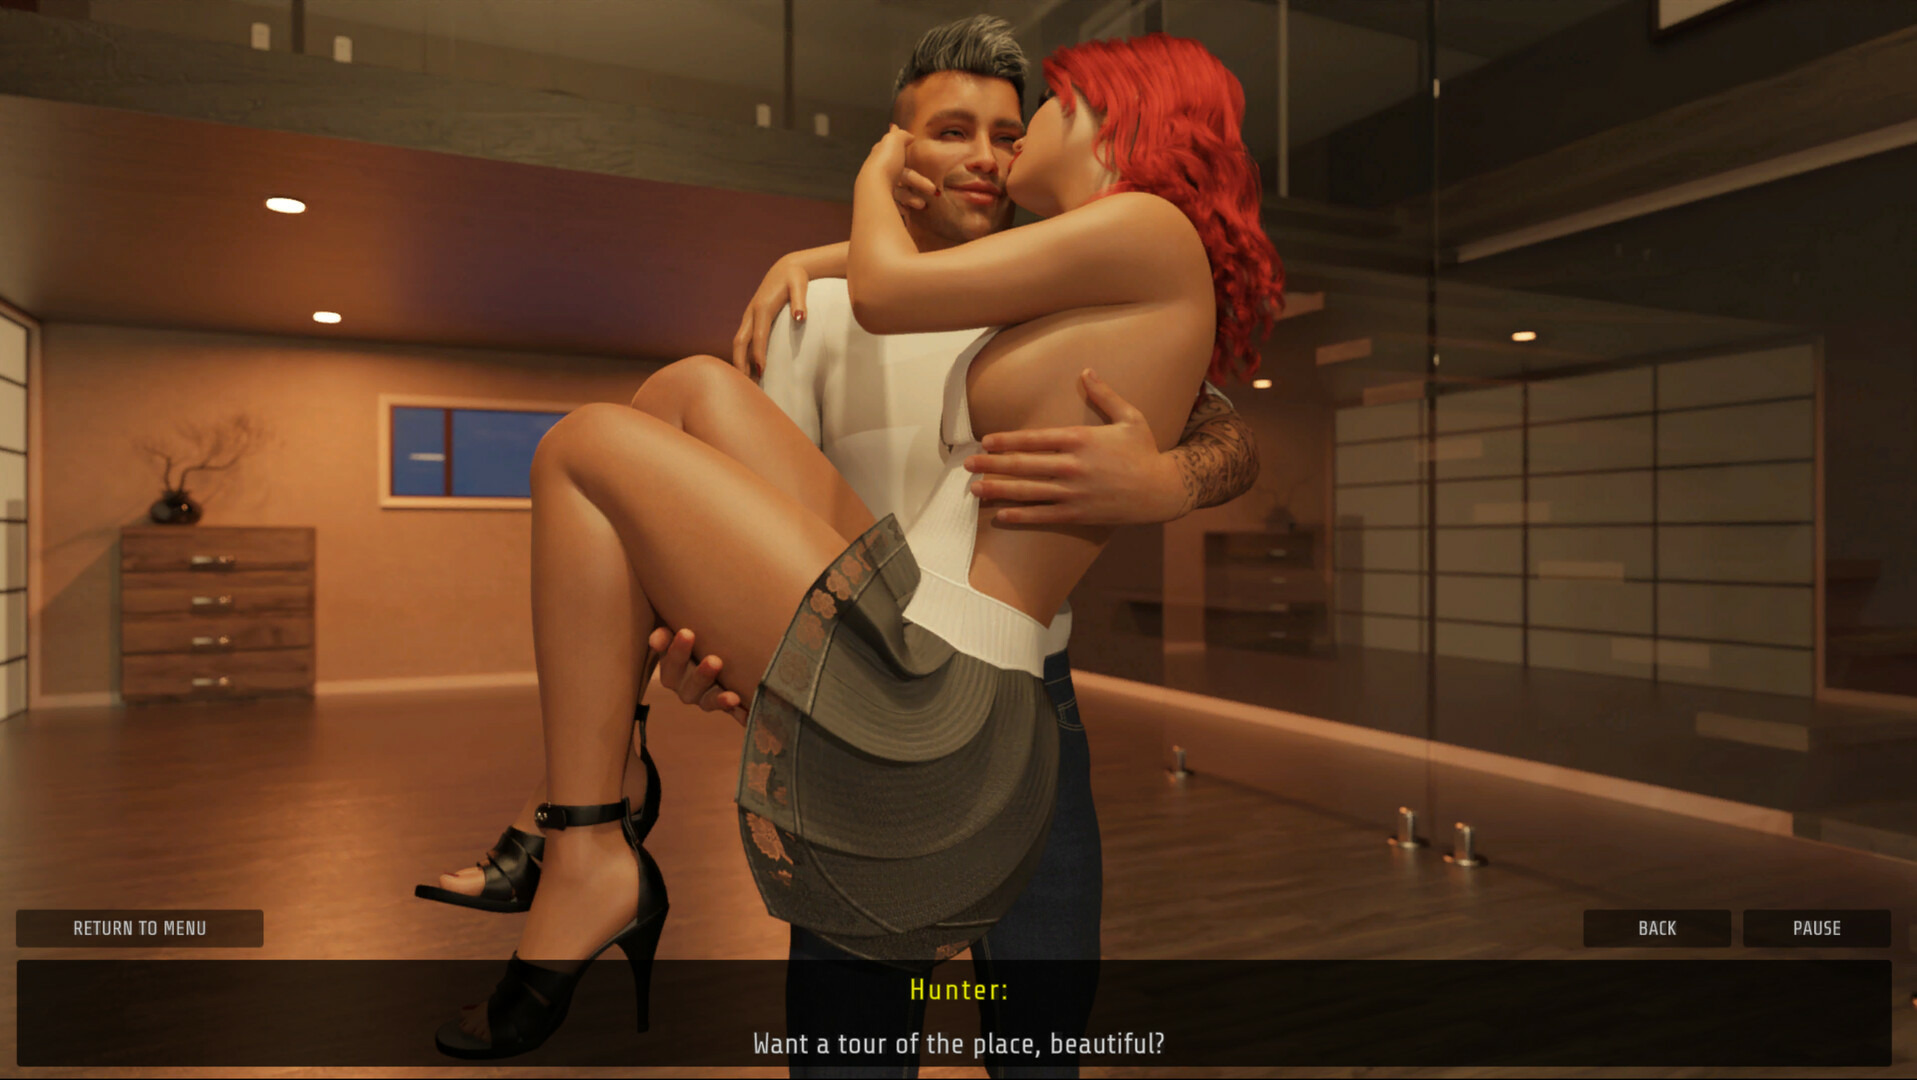 Sex Story - Ruby and Hunter - Episode 2 Steam CD Key [$ 1.92]